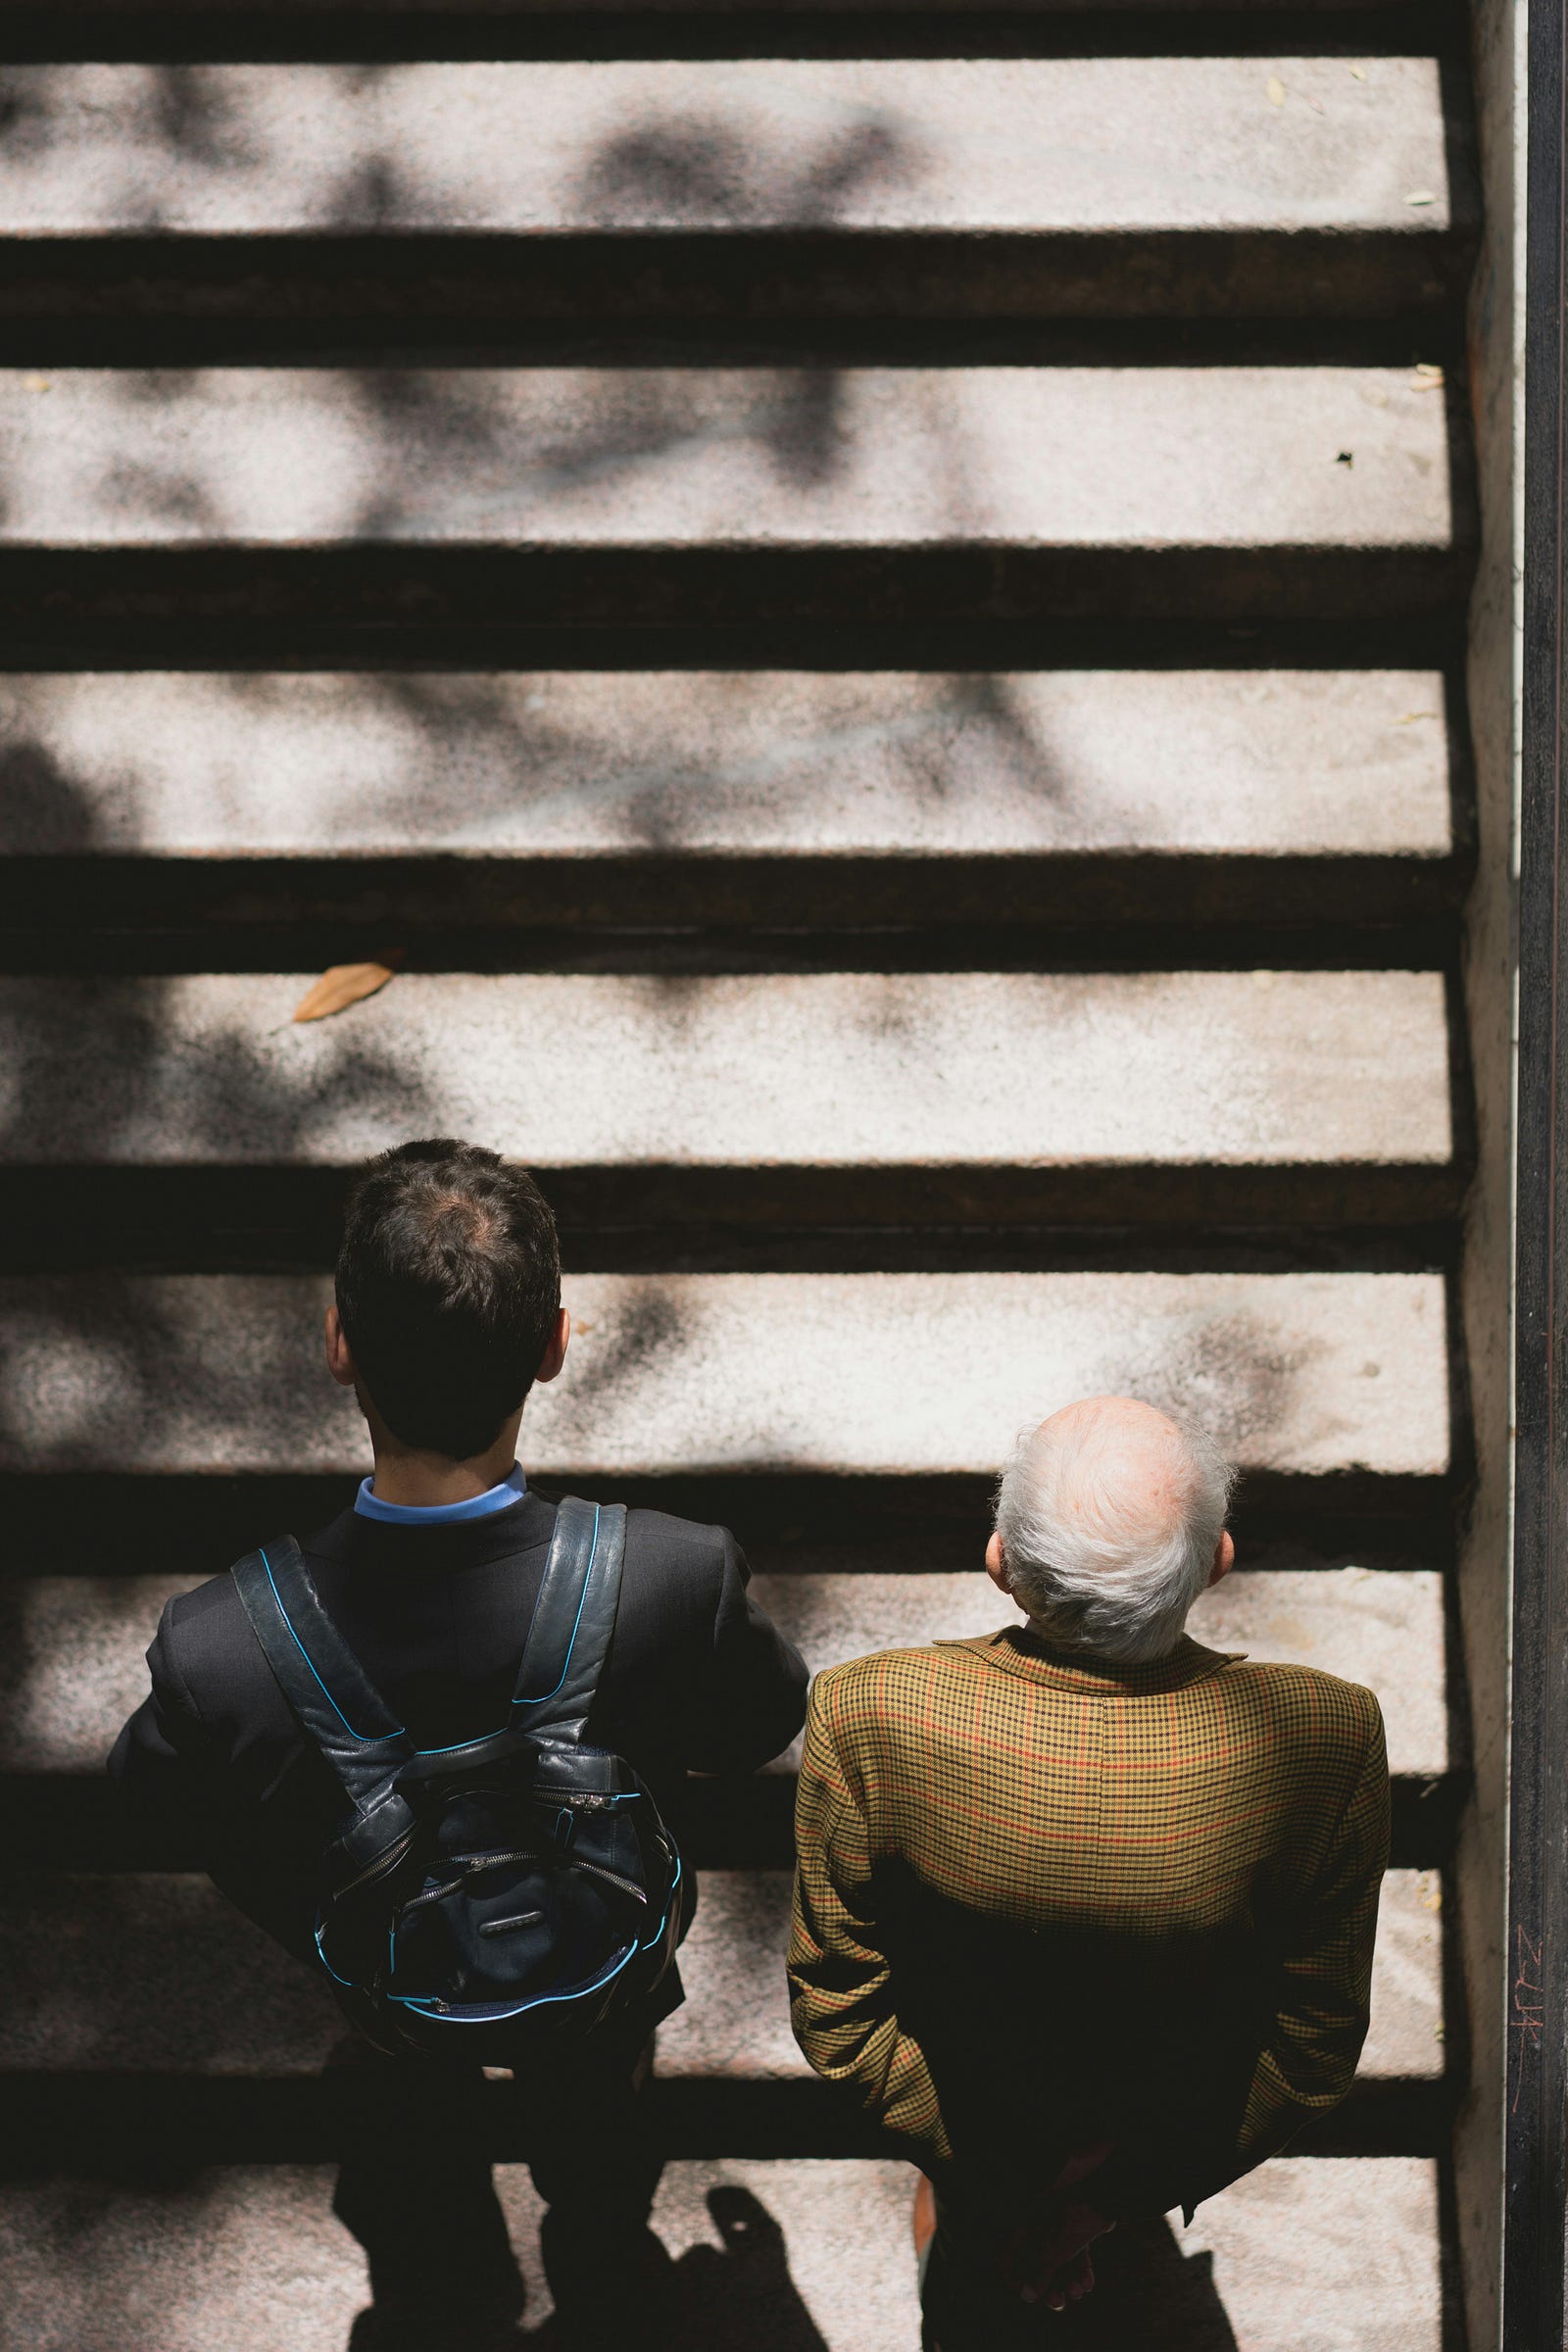 A younger and an older man walk up steps. Our protein needs increase with age.